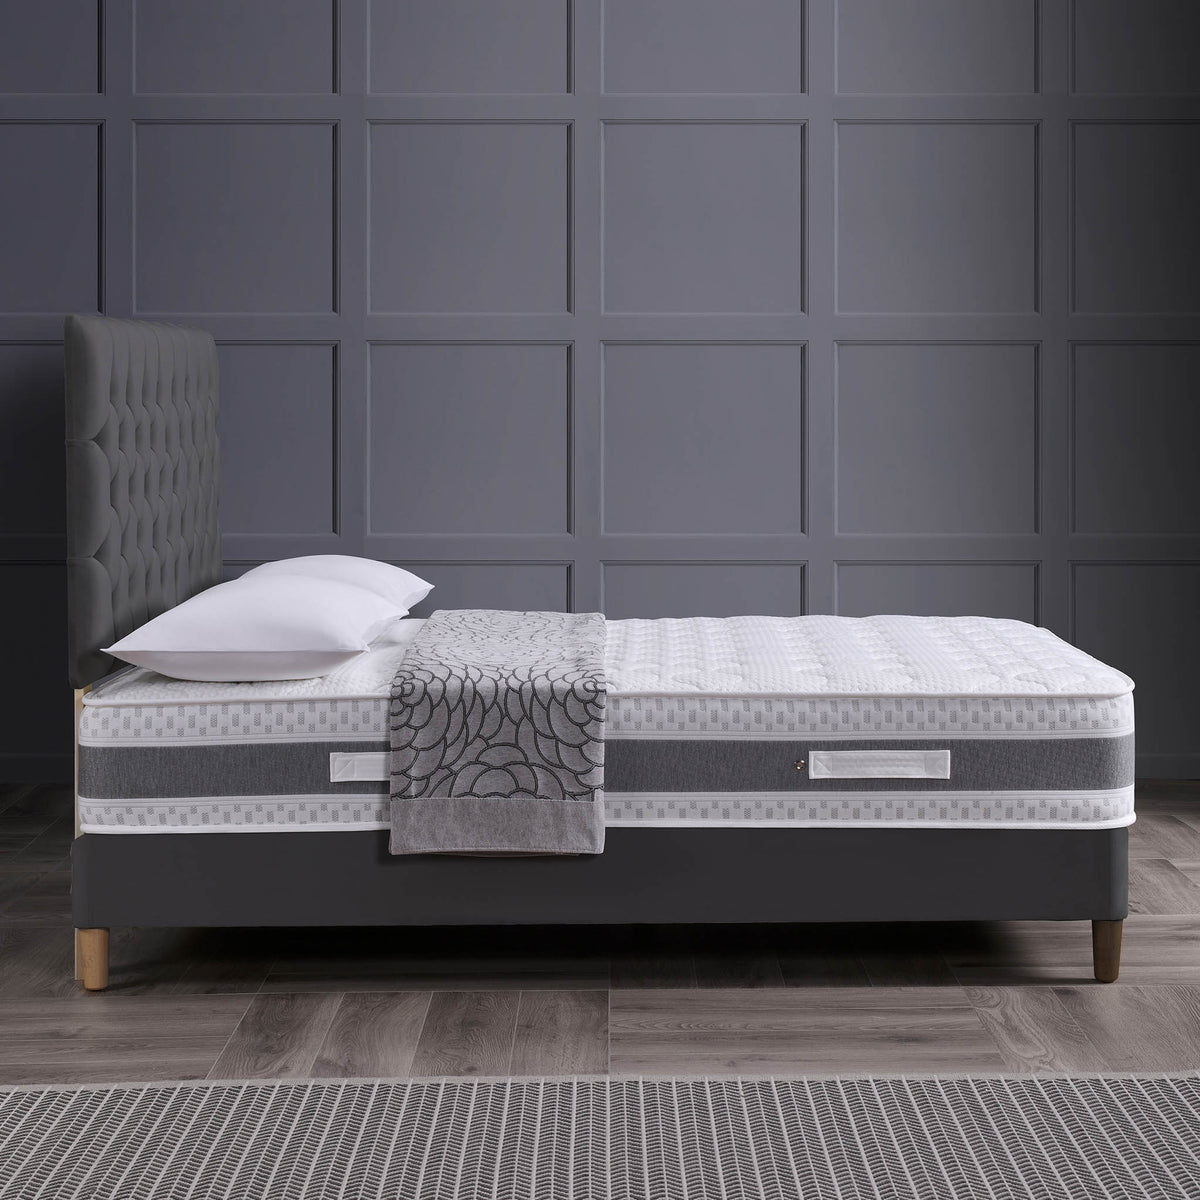 side lifestyle view of the Roseland Sleep Stratford Memory Coil Mattress